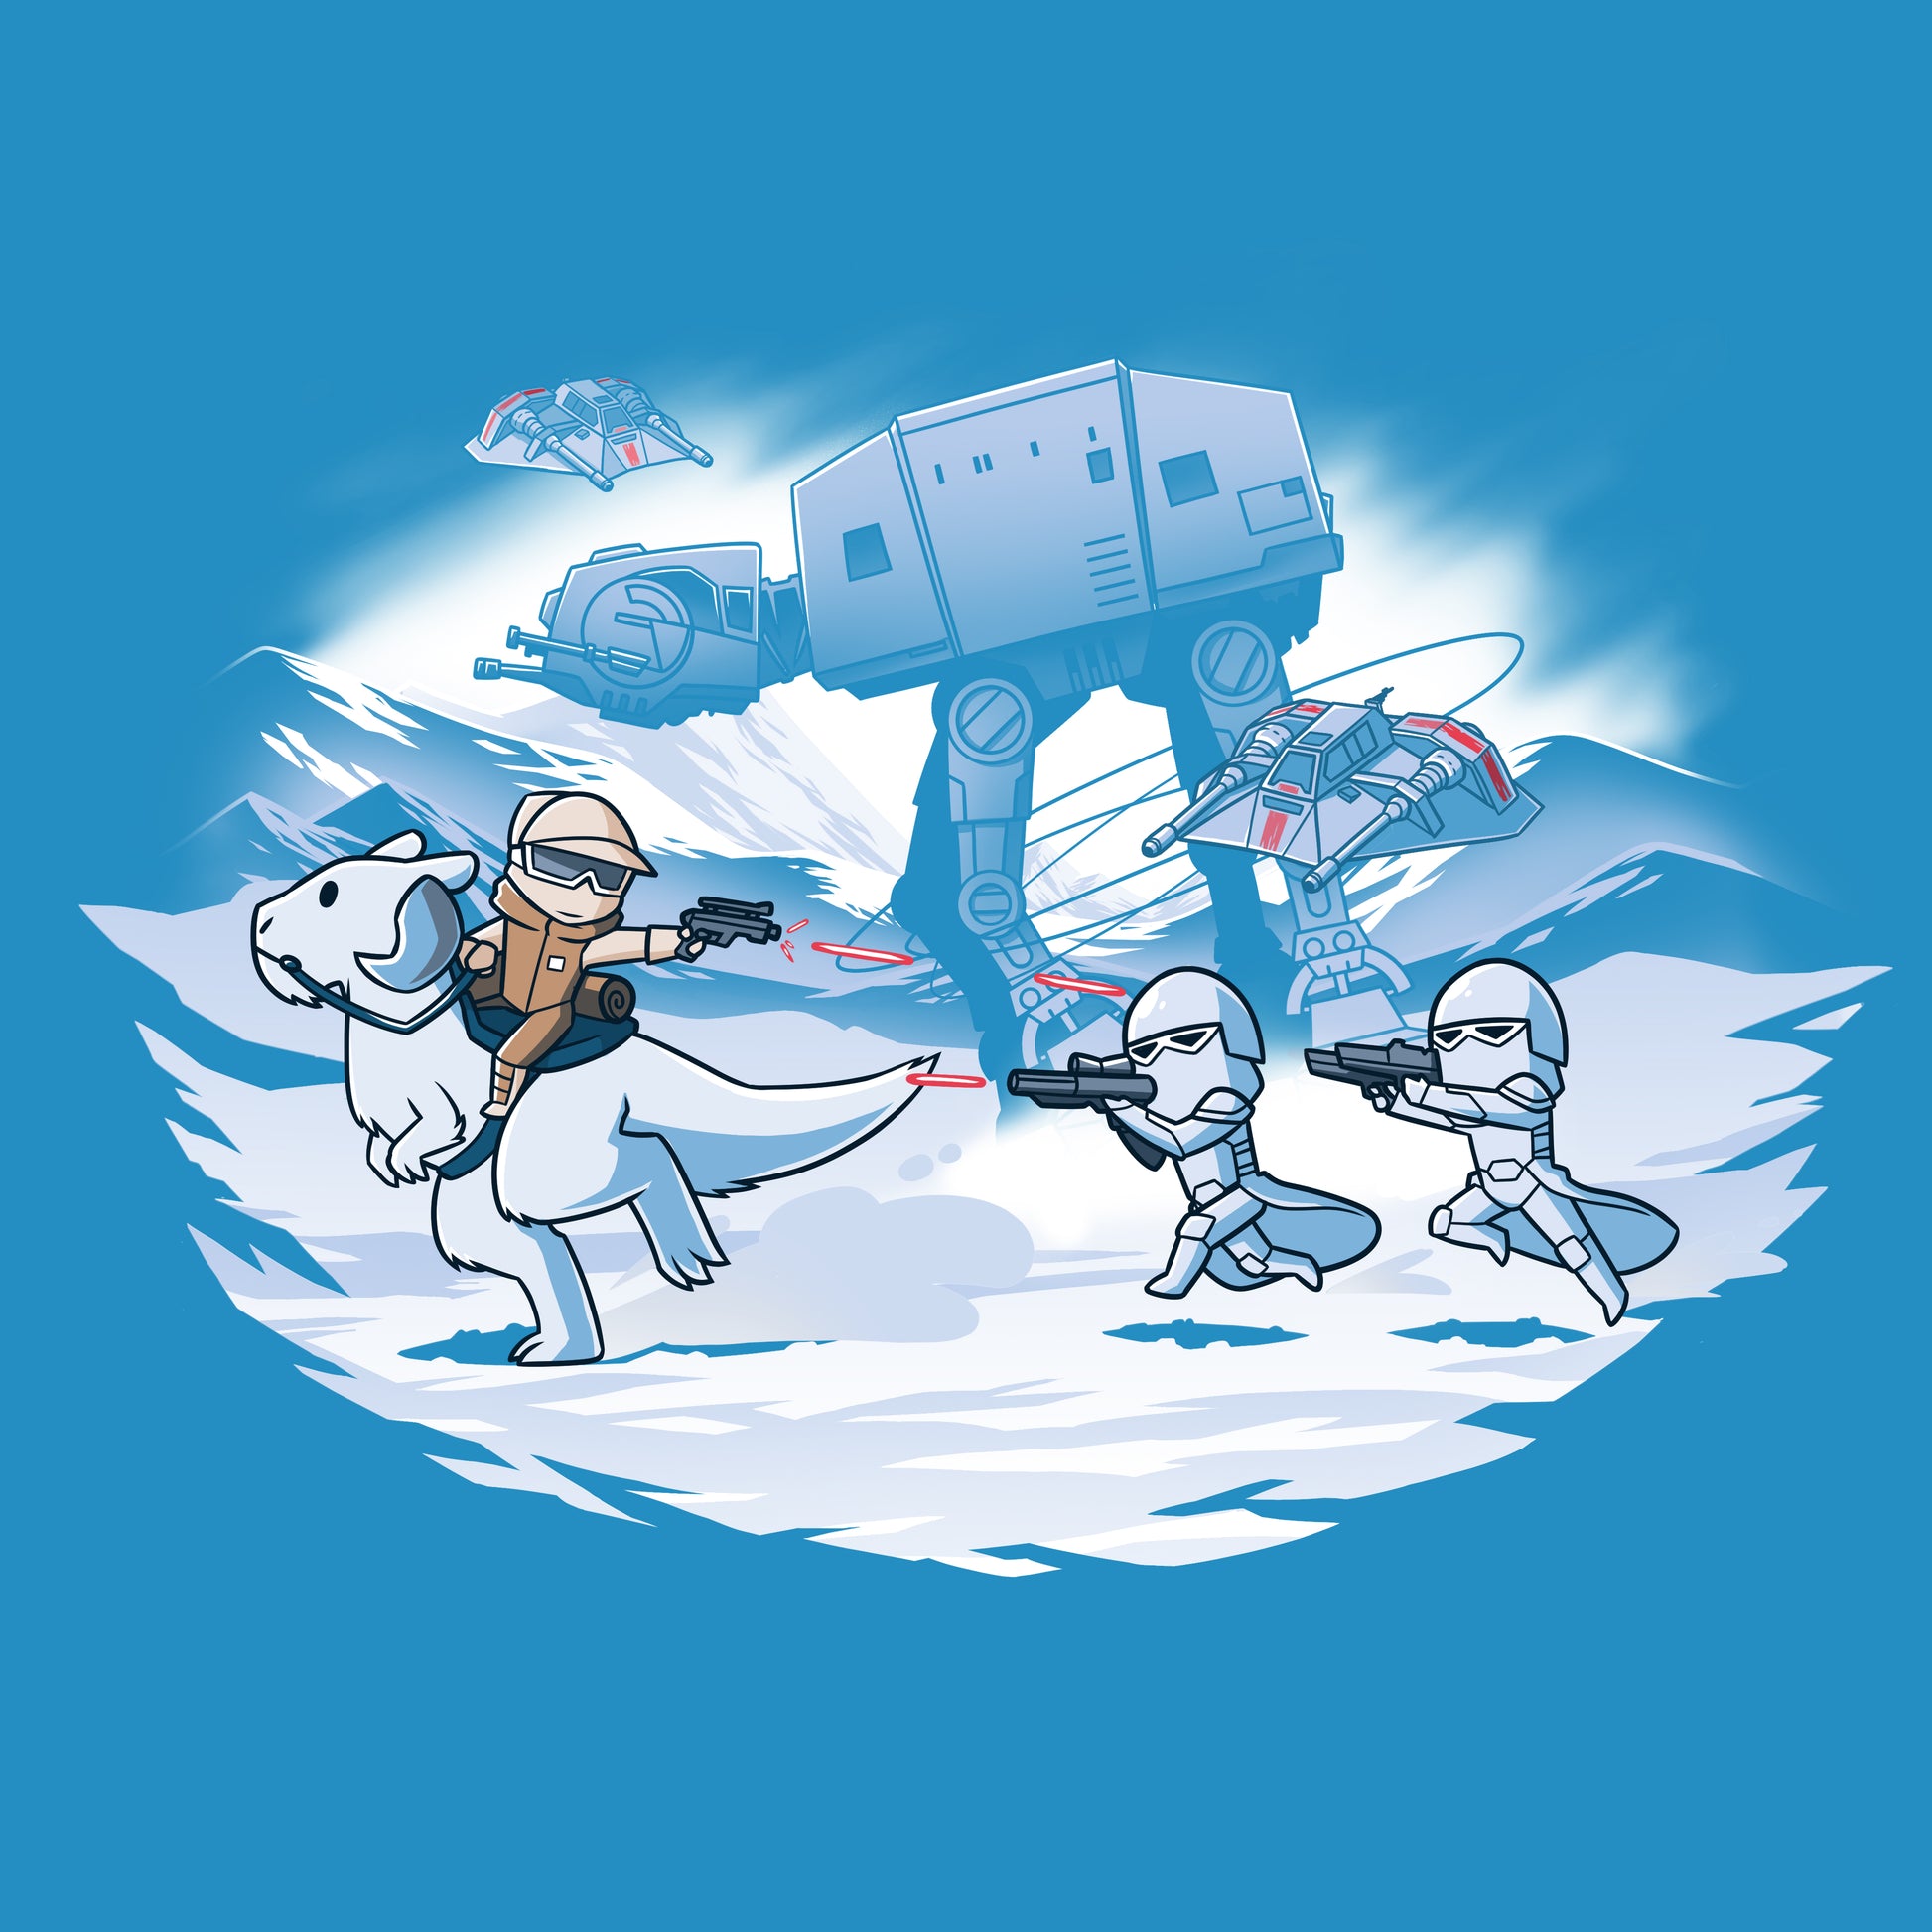 Officially licensed Star Wars Battle of Hoth AT-AT t-shirt.